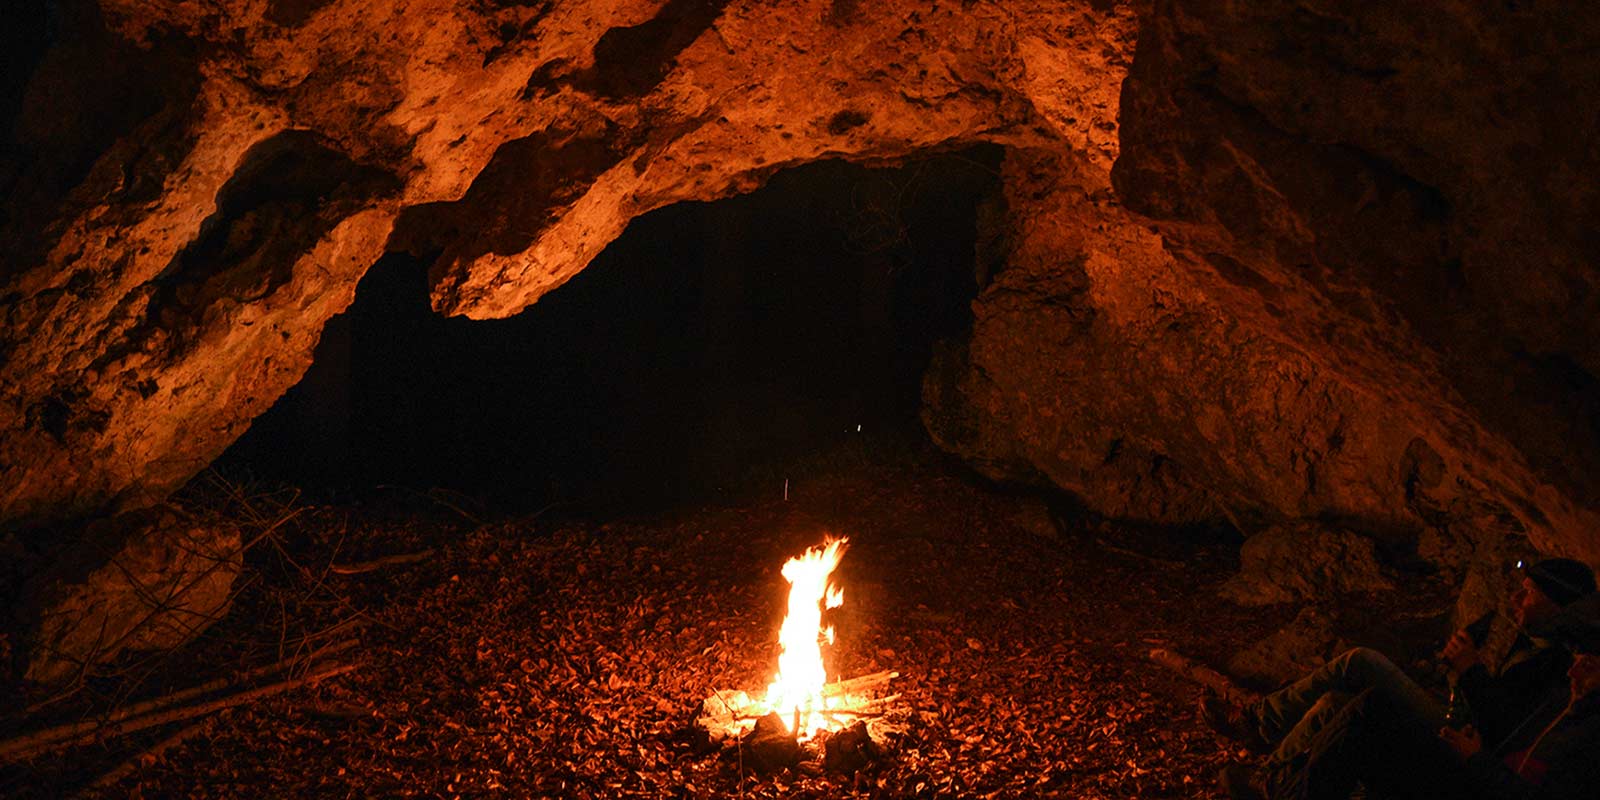 Campfire in a cave representing the earliest gathering place for storytelling, as well as the Holy Spirit.